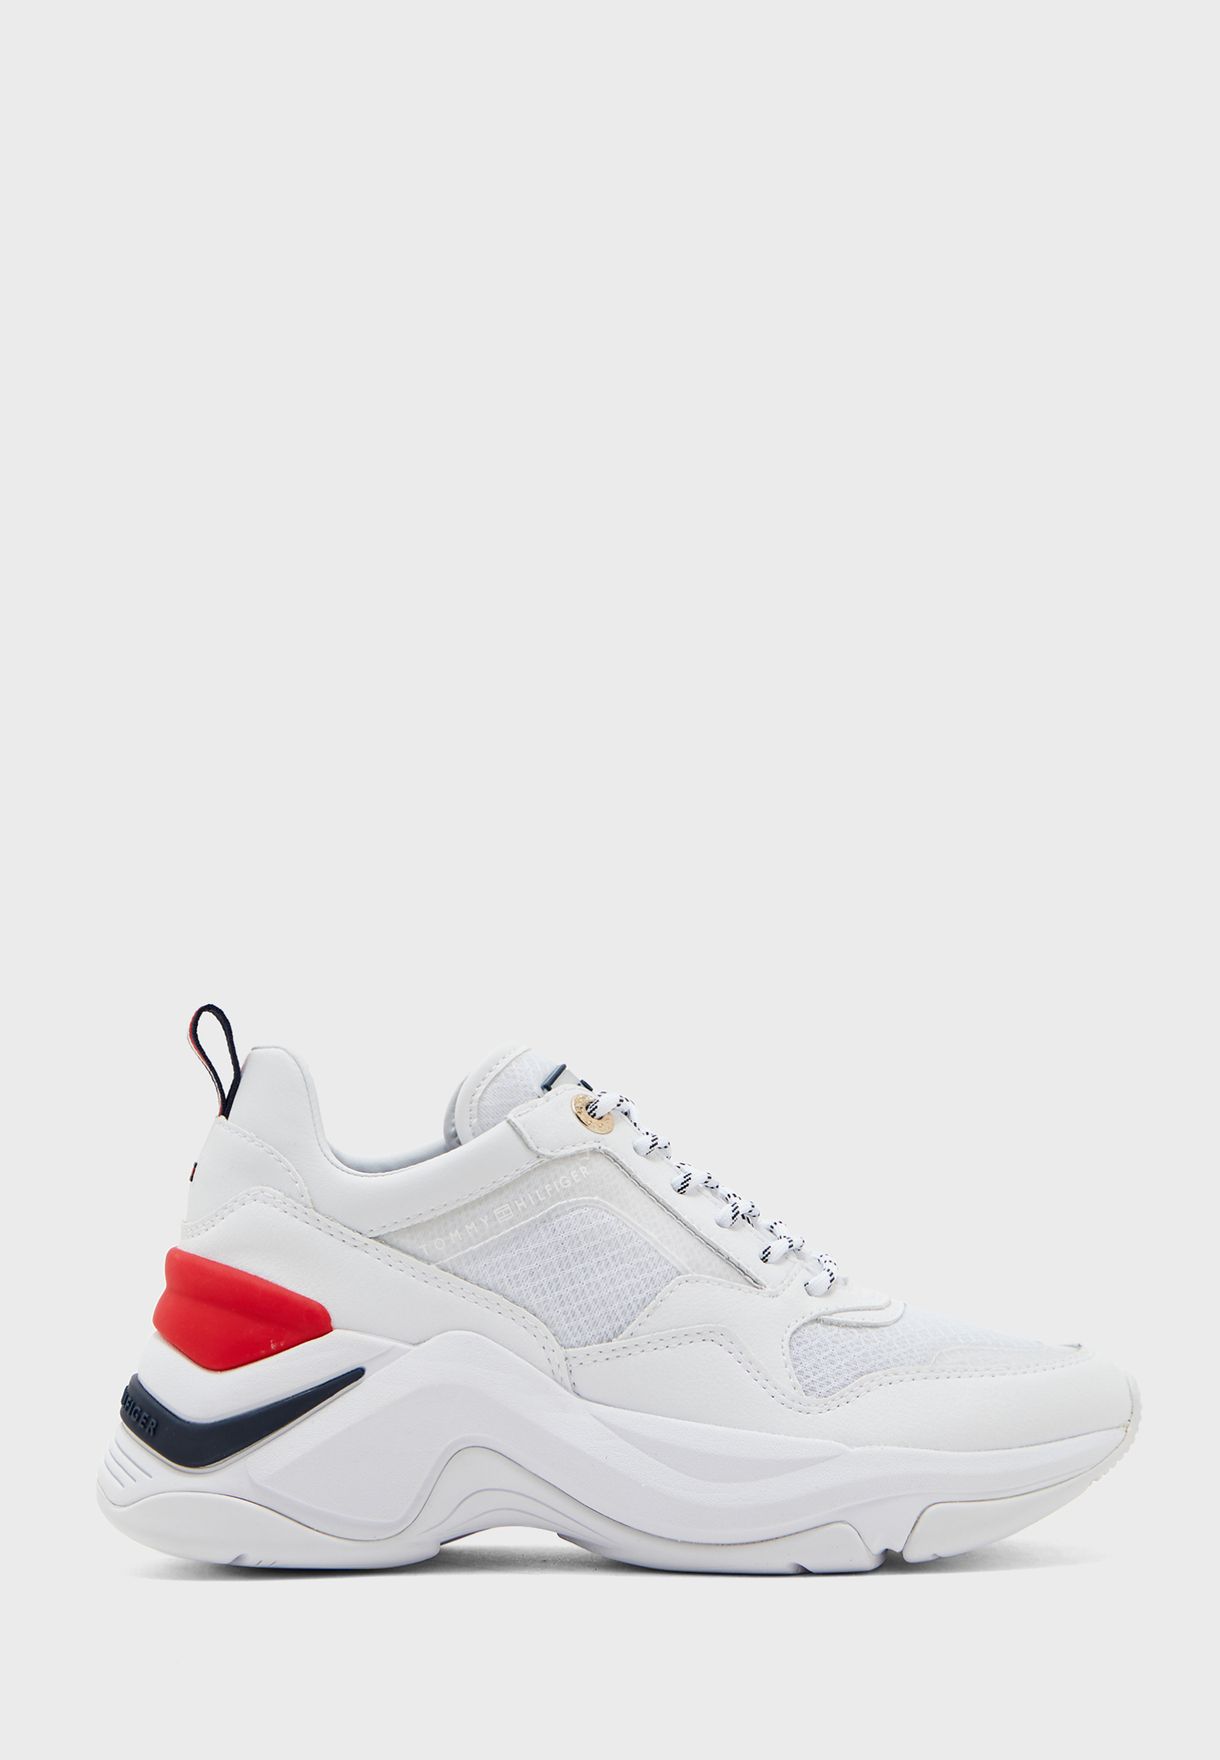 tommy hilfiger white sneakers womens